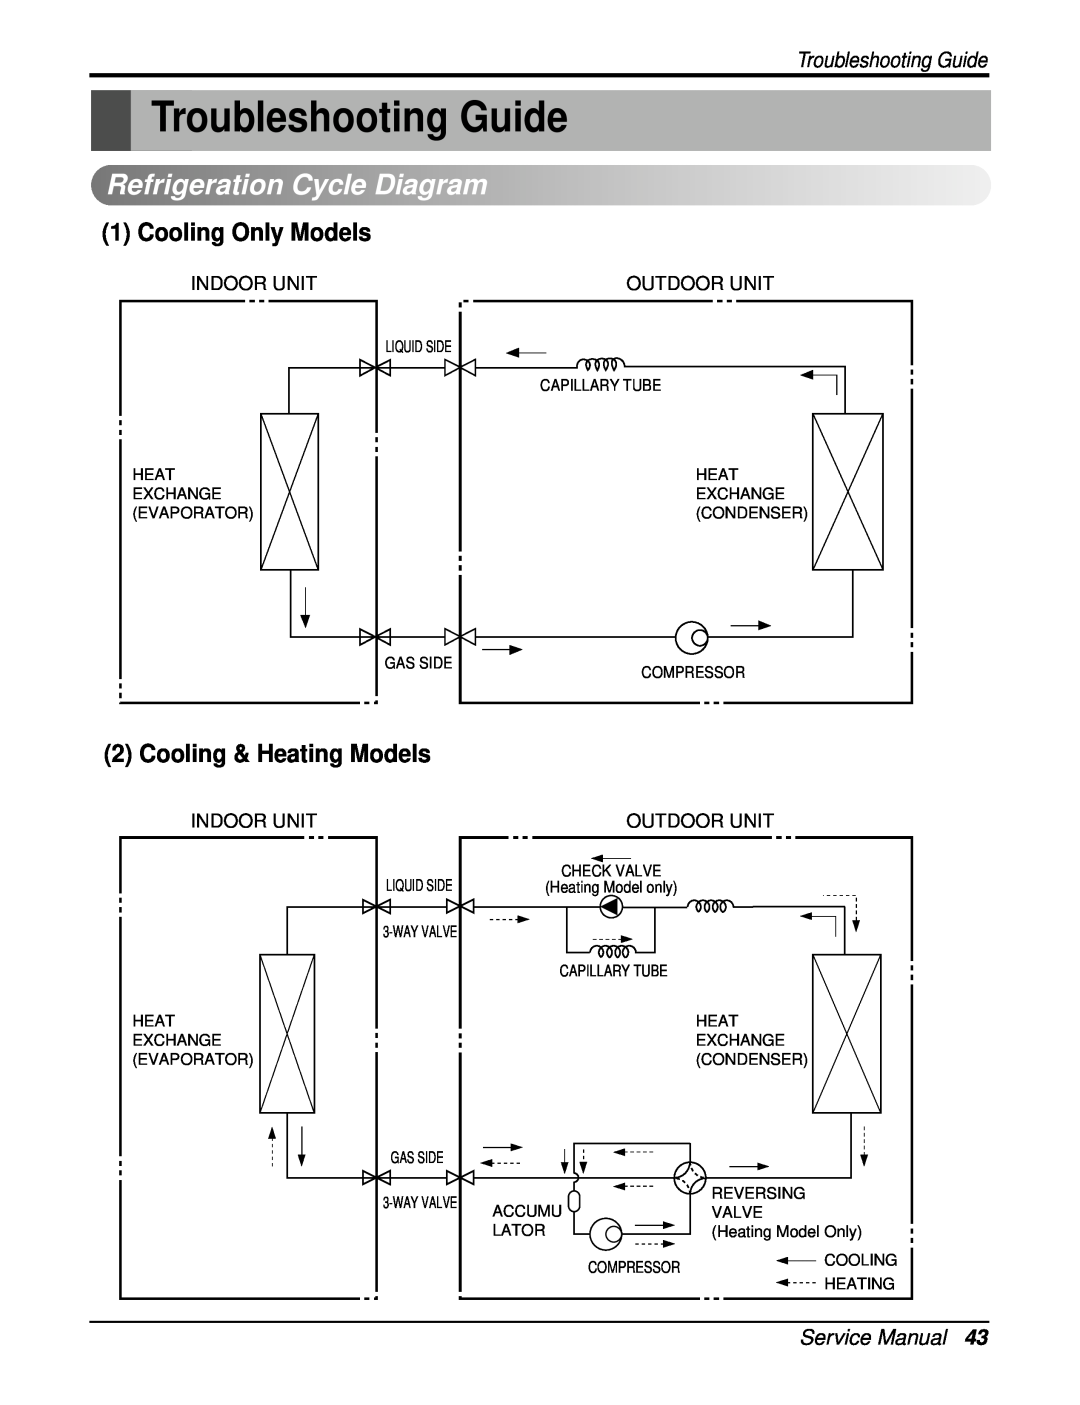 Heat Controller DMH09SB-0 Troubleshooting Guide, RefrigerationCycleDiagram, Cooling Only Models, Cooling & Heating Models 